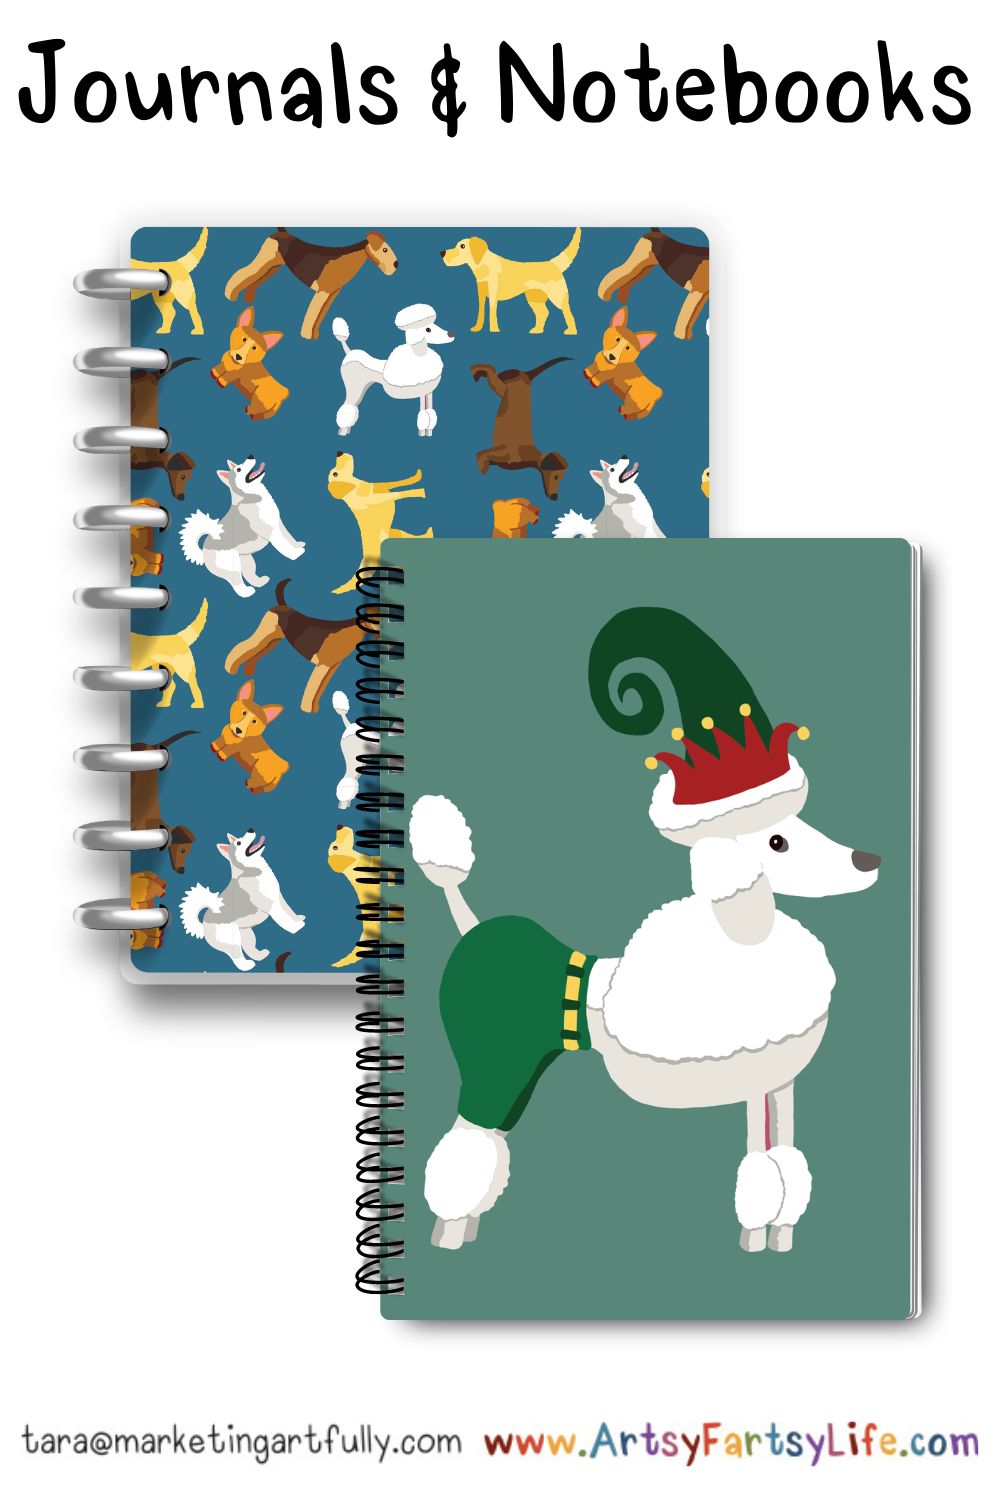 Everyday Dogs 1 Surface Design For Journals or Notebooks